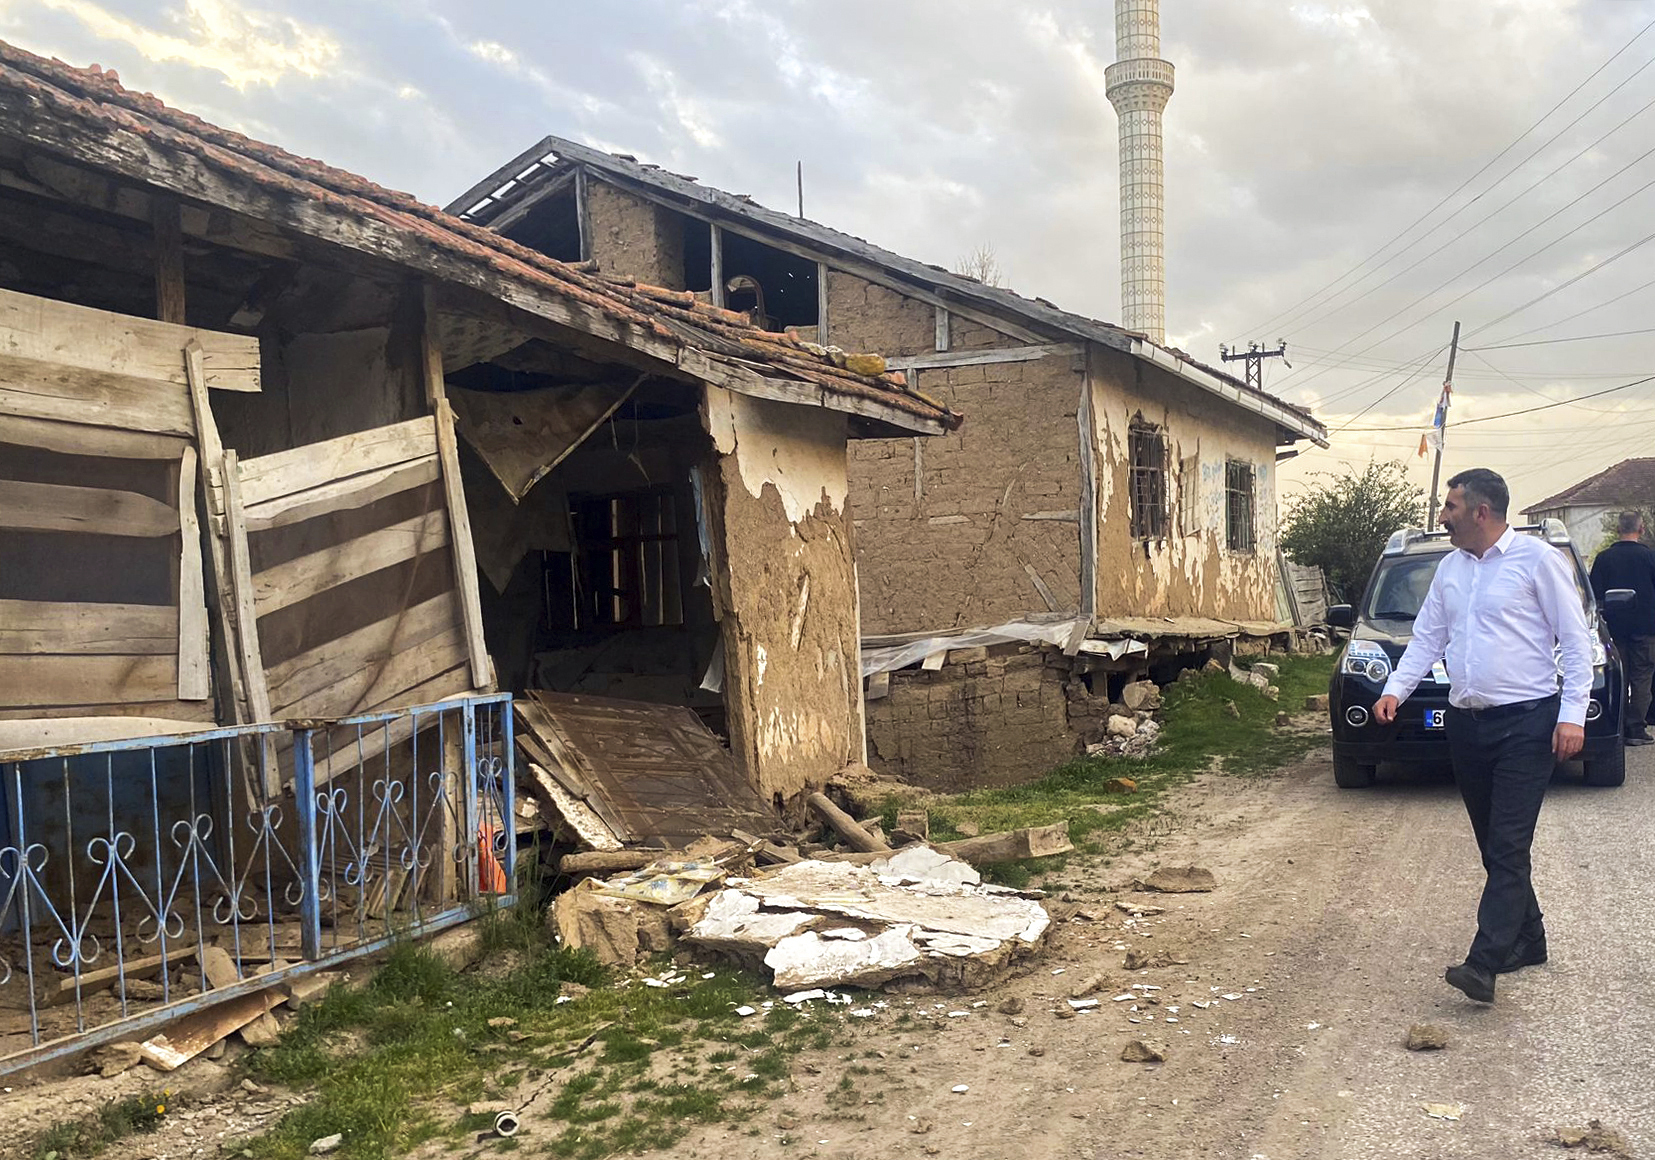 A 5.6-magnitude earthquake struck central Türkiye, damaging some homes.  No serious injuries were reported